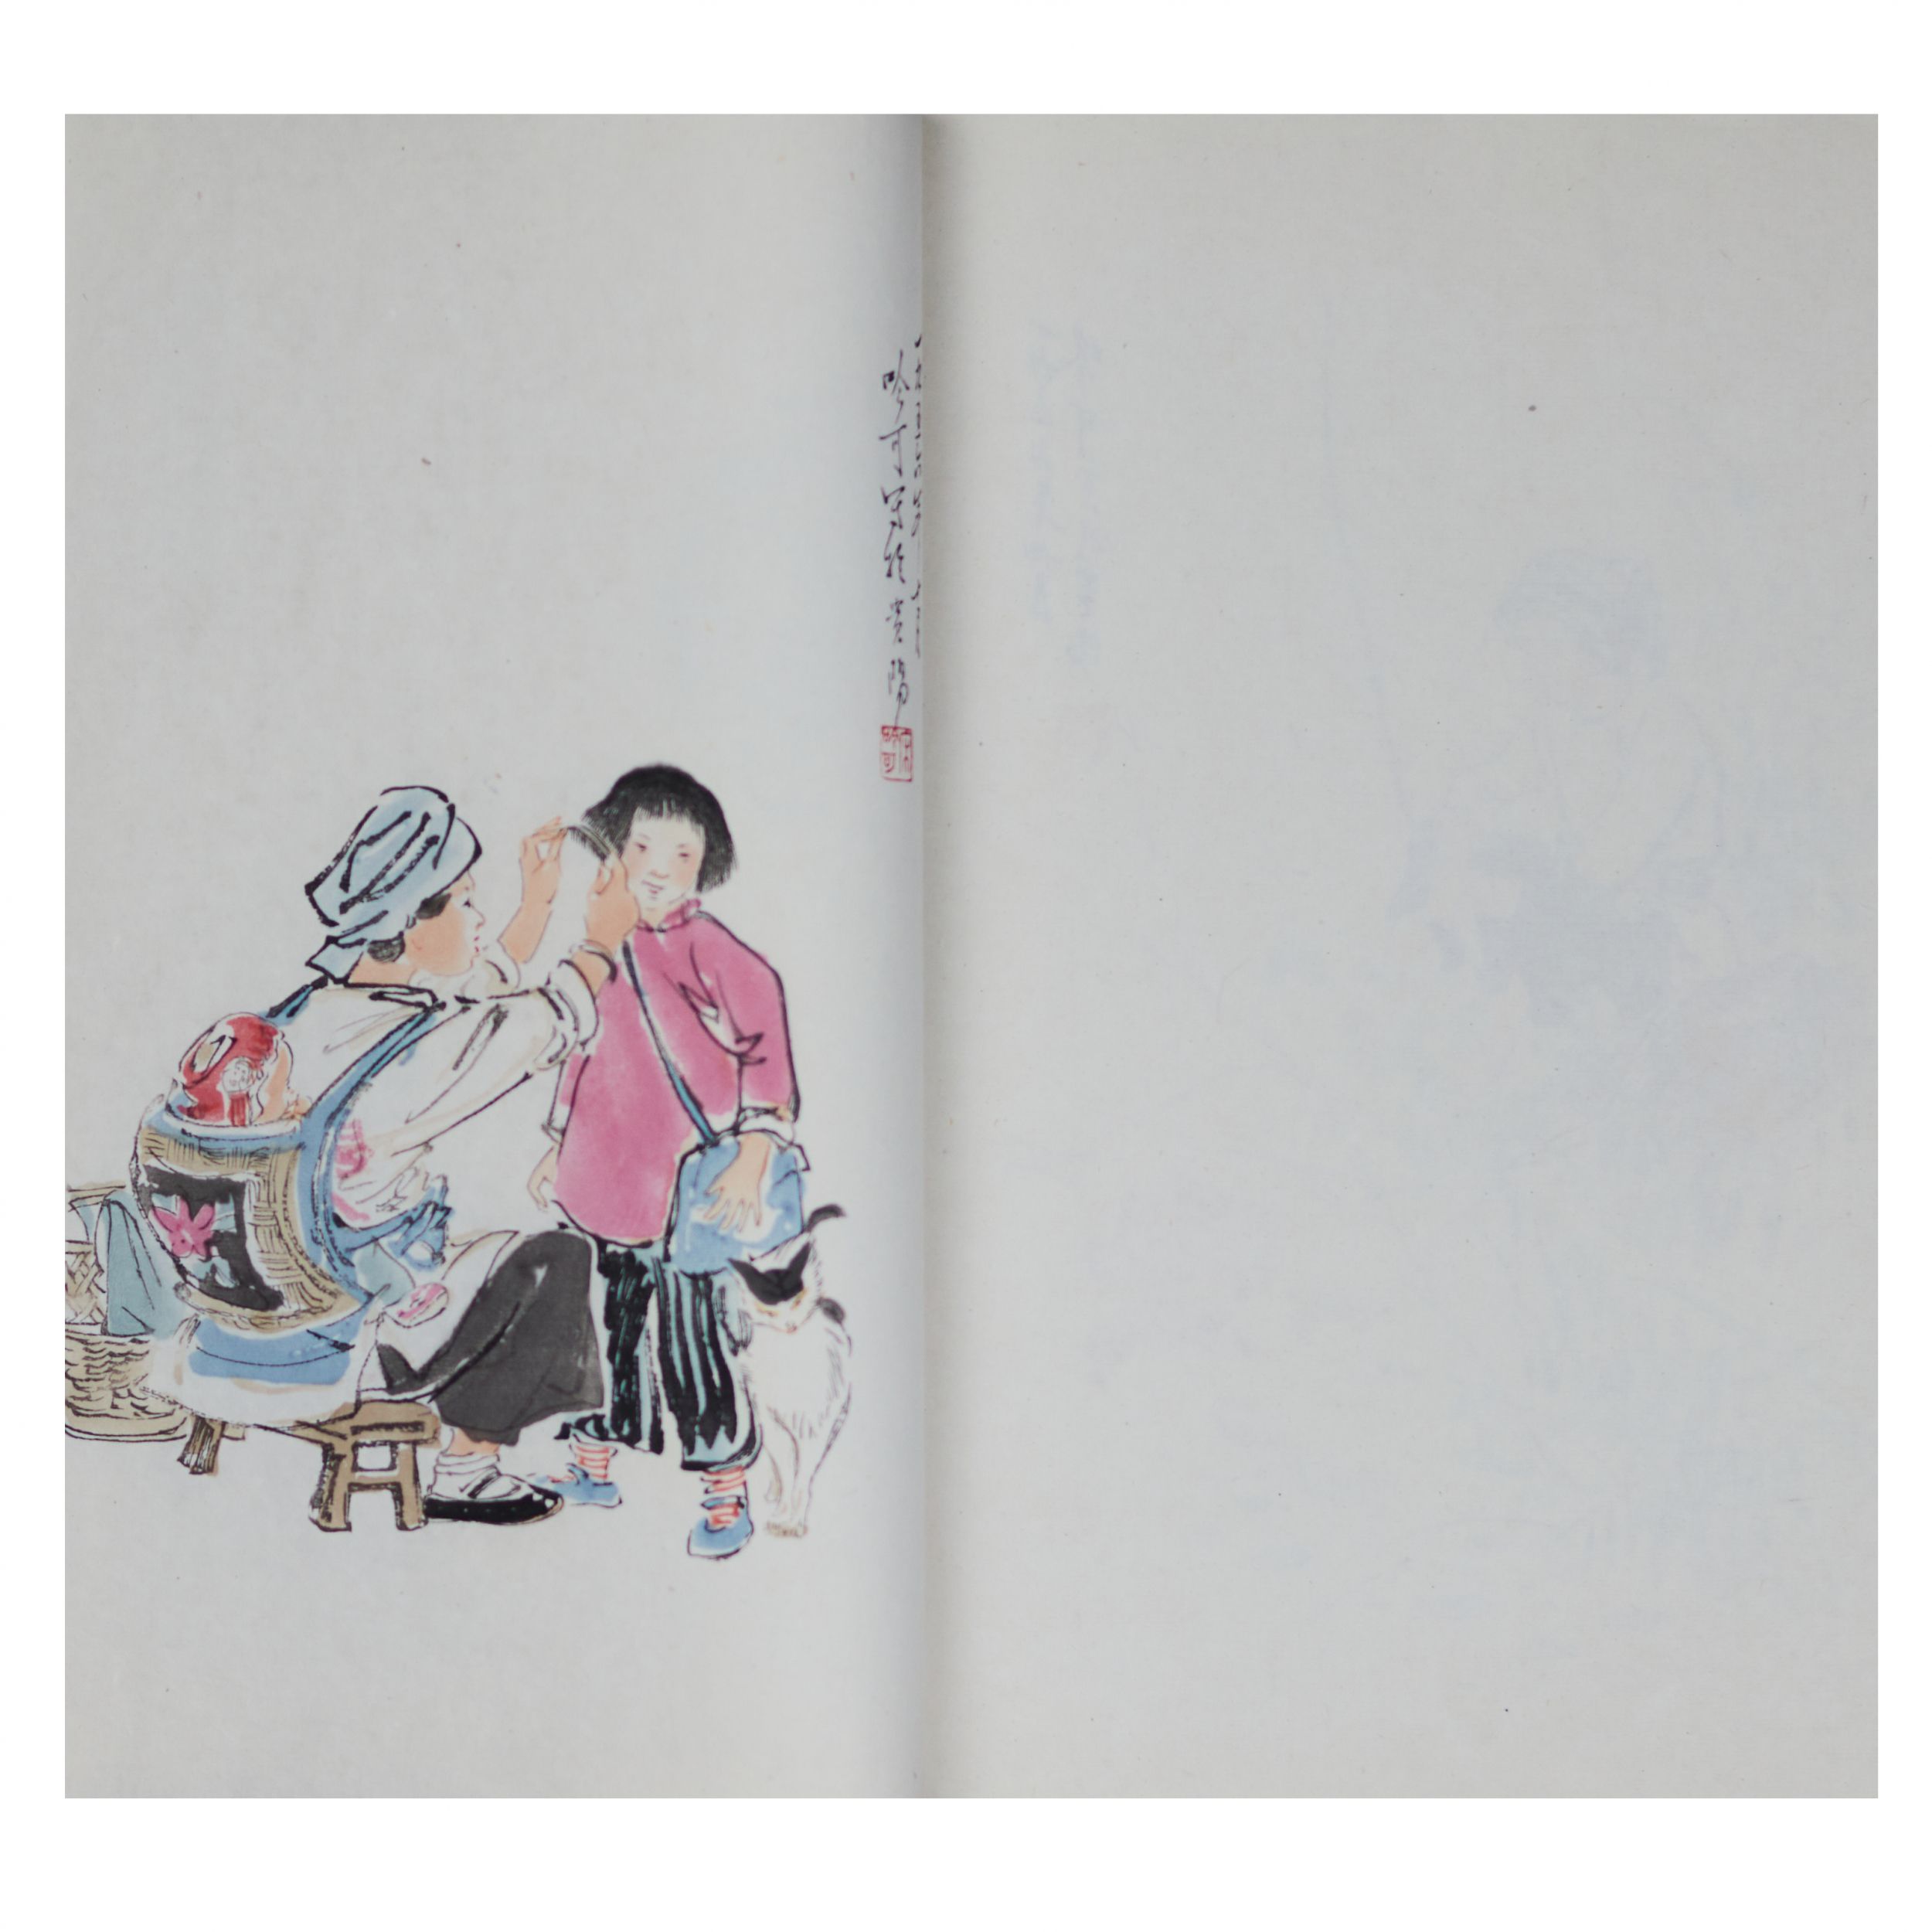 Collection of Chinese paintings by Guo-Hua, edited by Guo Mozhuo. China. 20th century. - Image 6 of 14